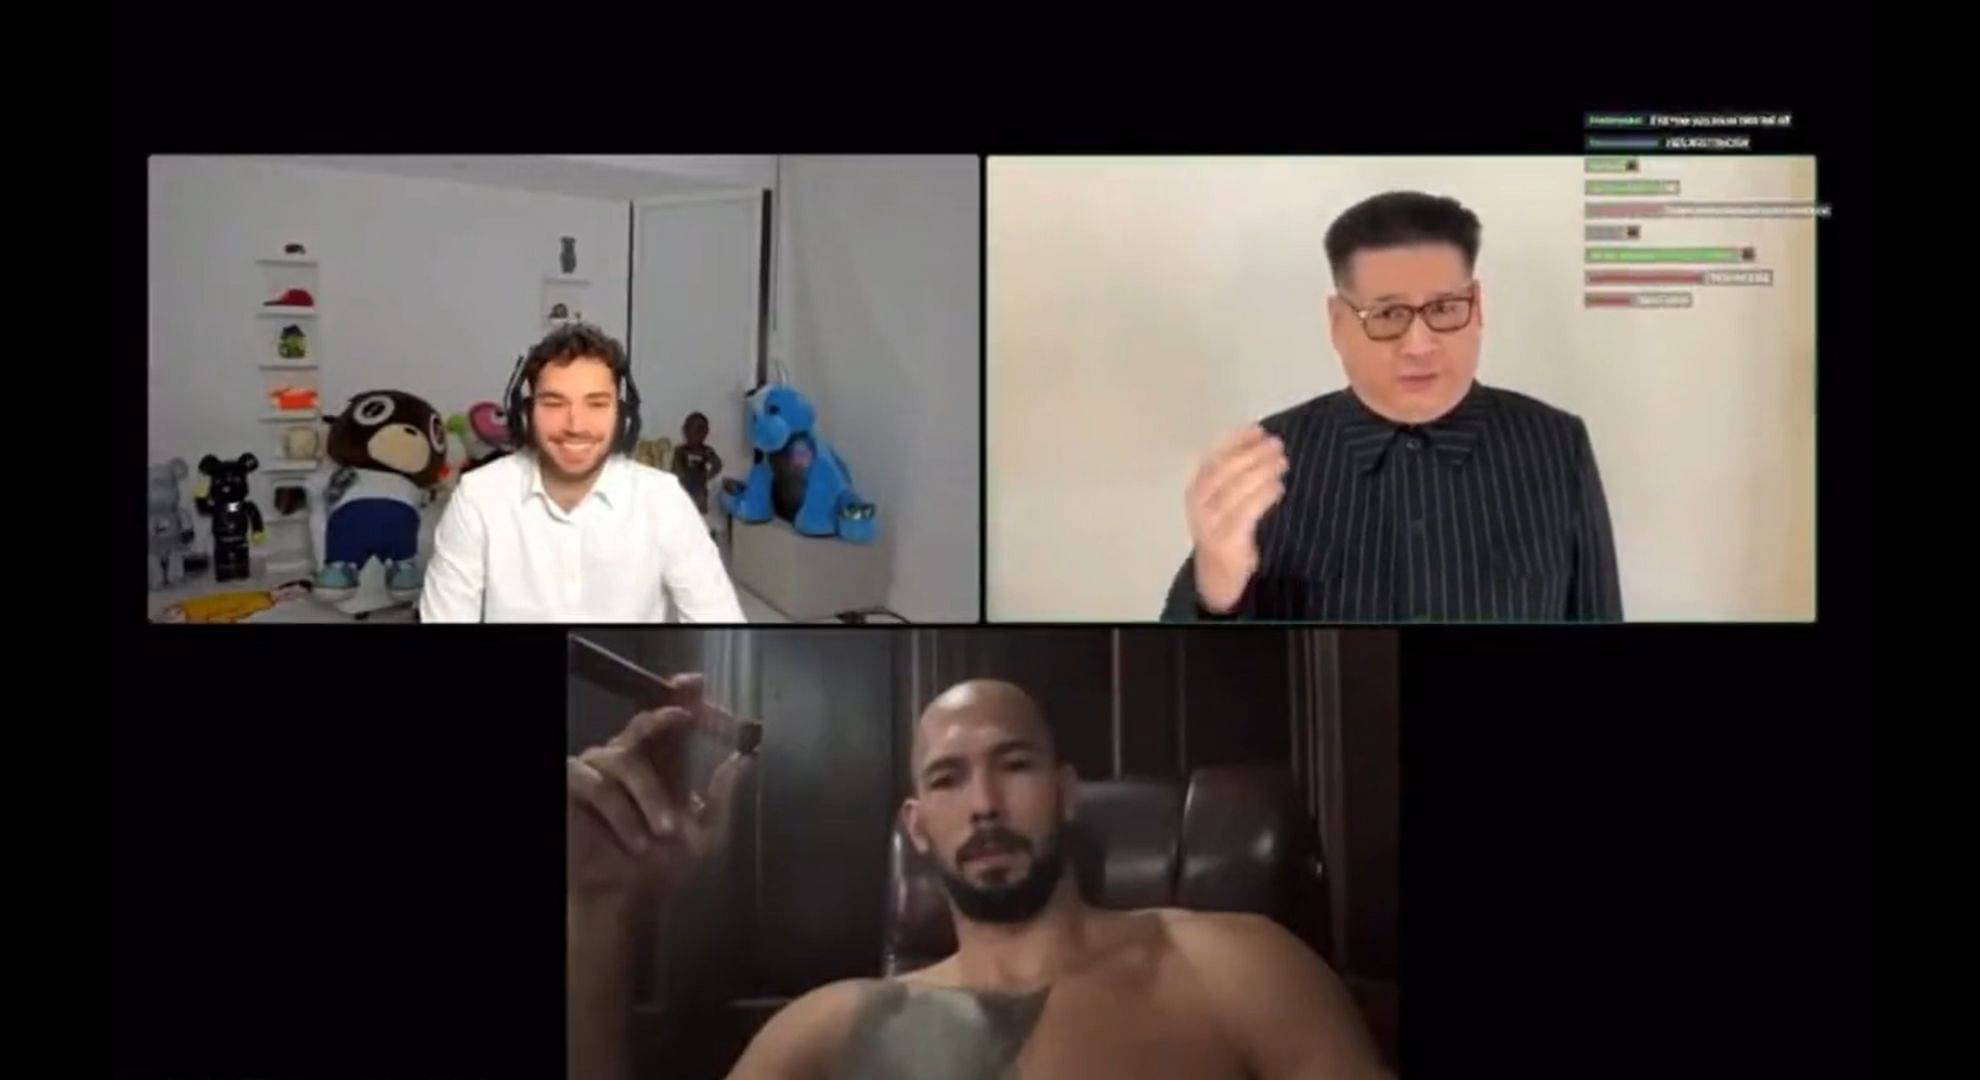 Adin Ross brings a Kim Jong Un impersonator for the most anticipated livestream